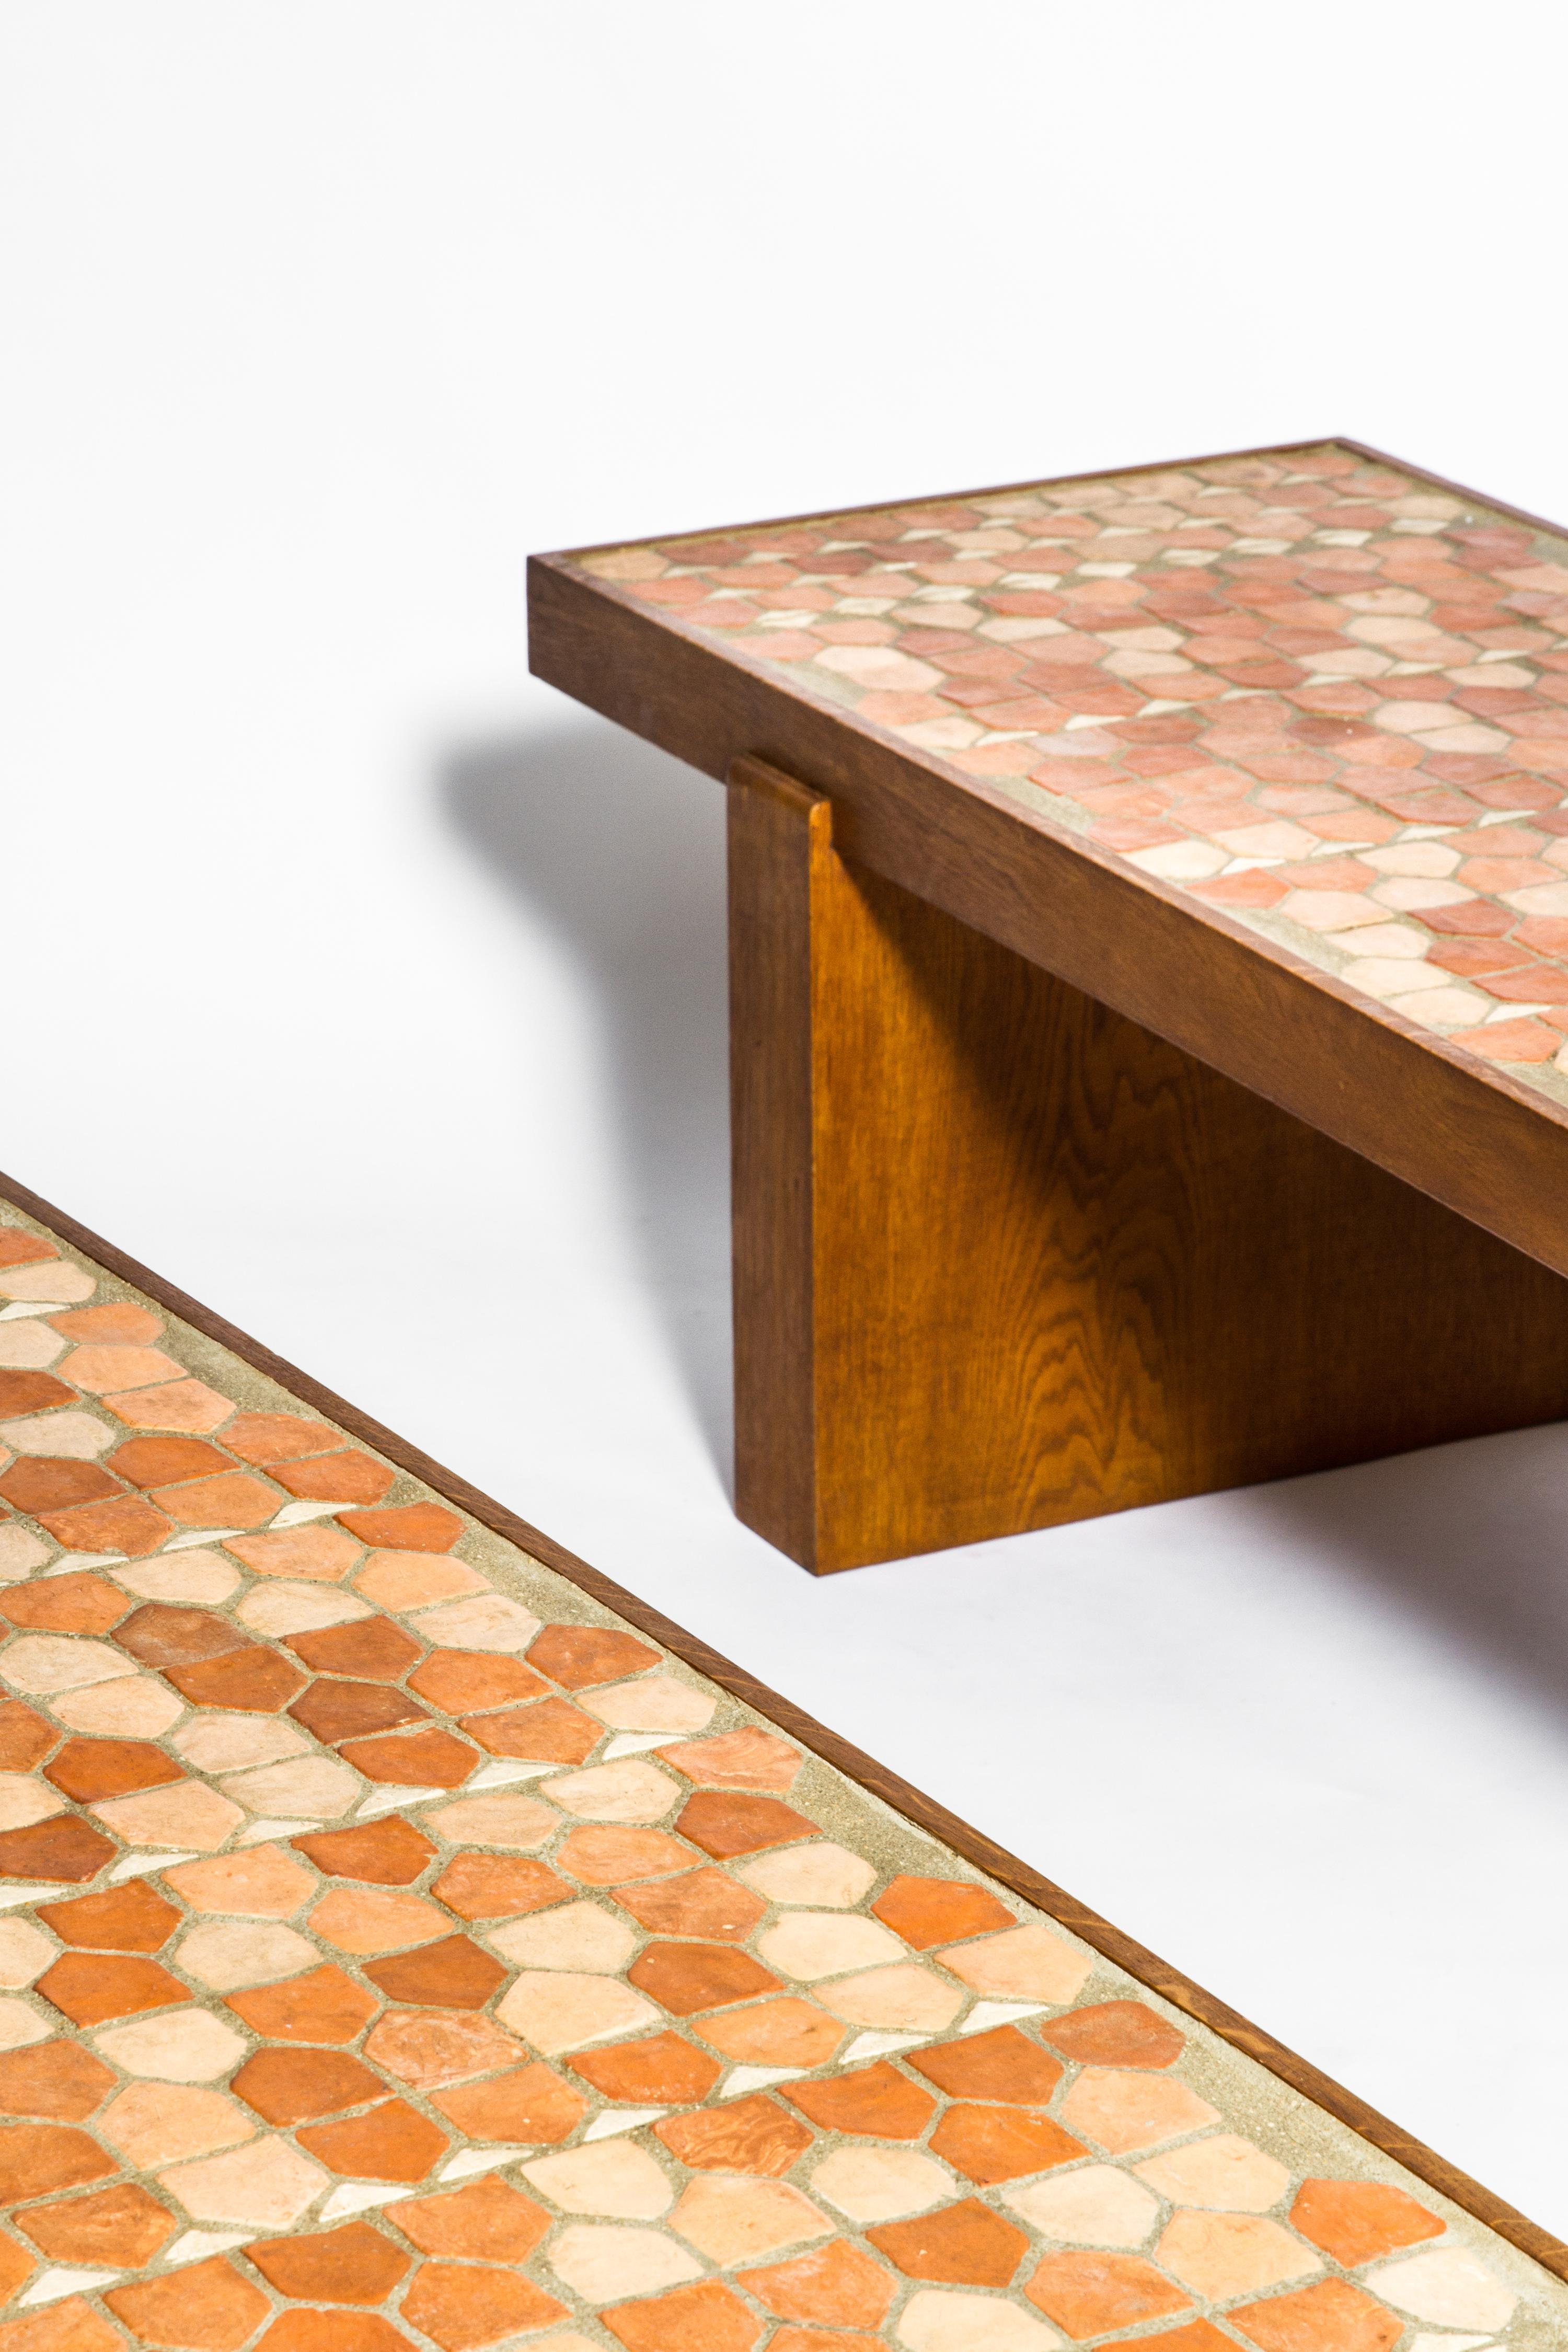 Pair of coffee tables by Jacques Adnet and Jacques Lenoble with ceramic top, circa 1950. 
Solid oak structure and terra cotta tiles for the top. 
These low tables are a collaboration between Jacques Adnet and Jacques Lenoble for La Compagnie des